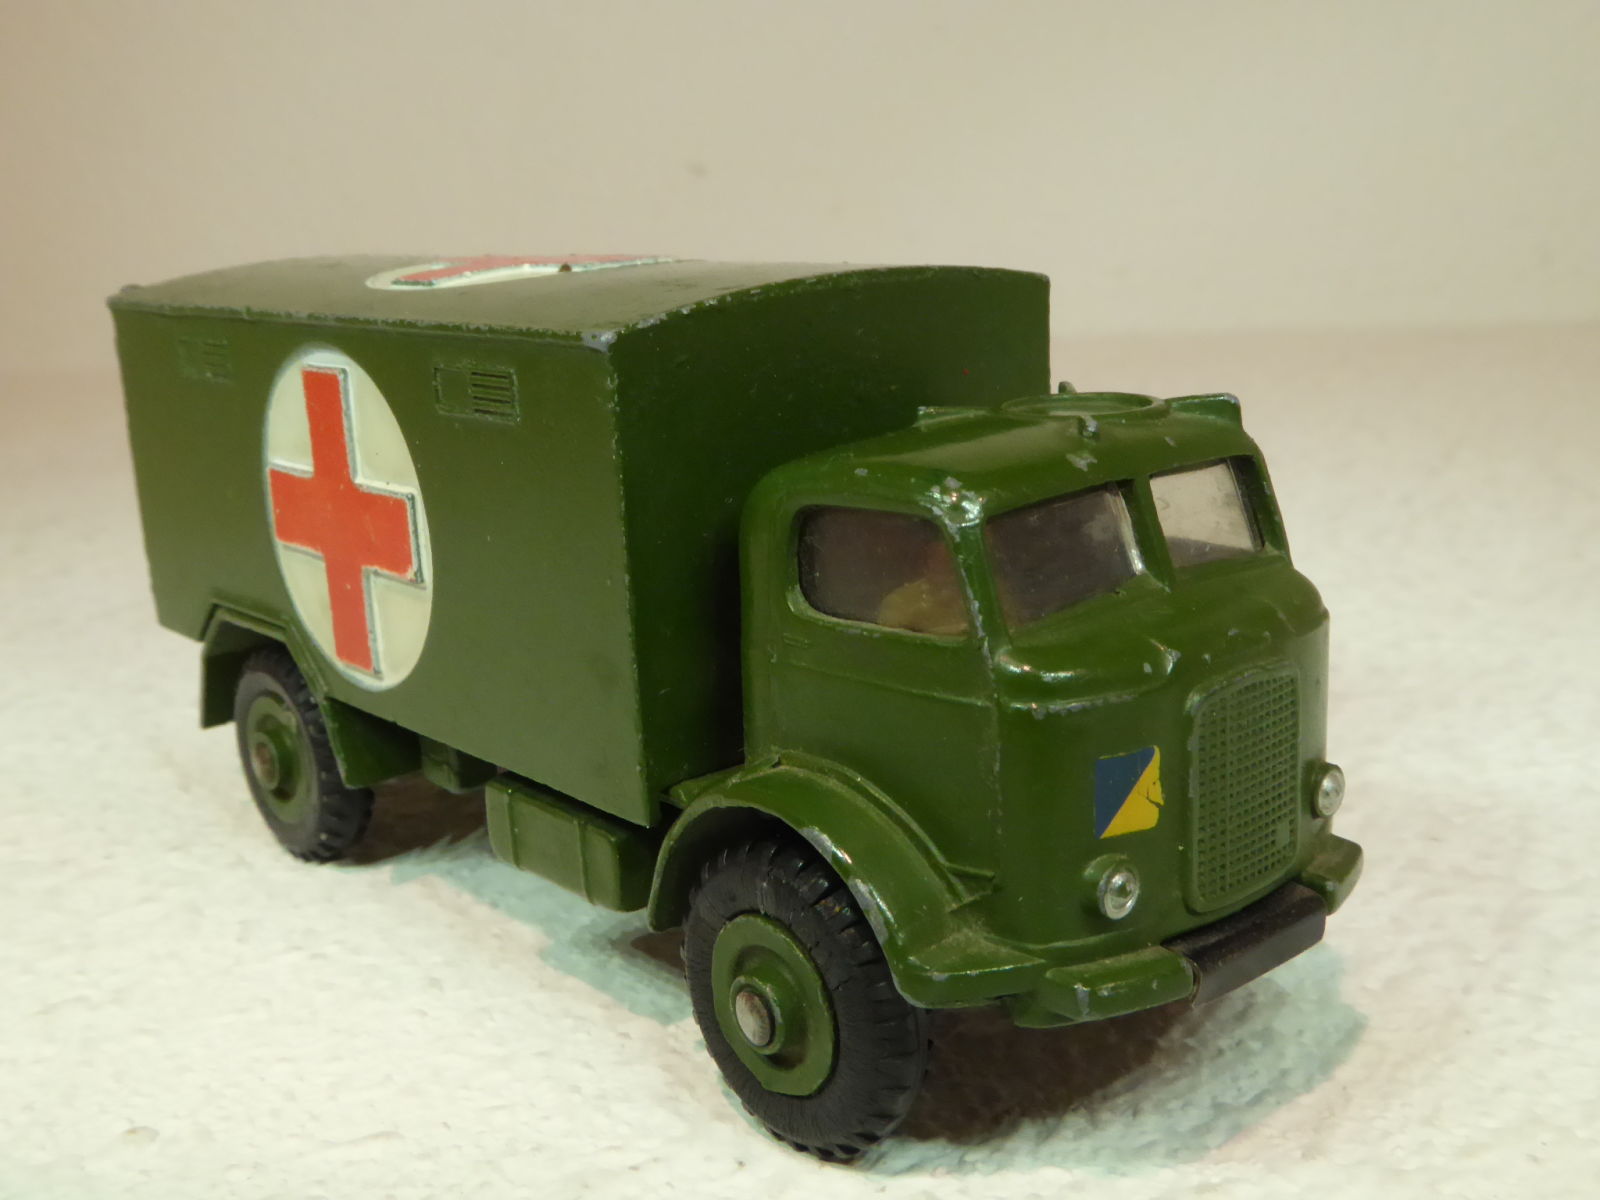 Illustration for article titled Forty 3rd: Ford Ambulance on a Friday?